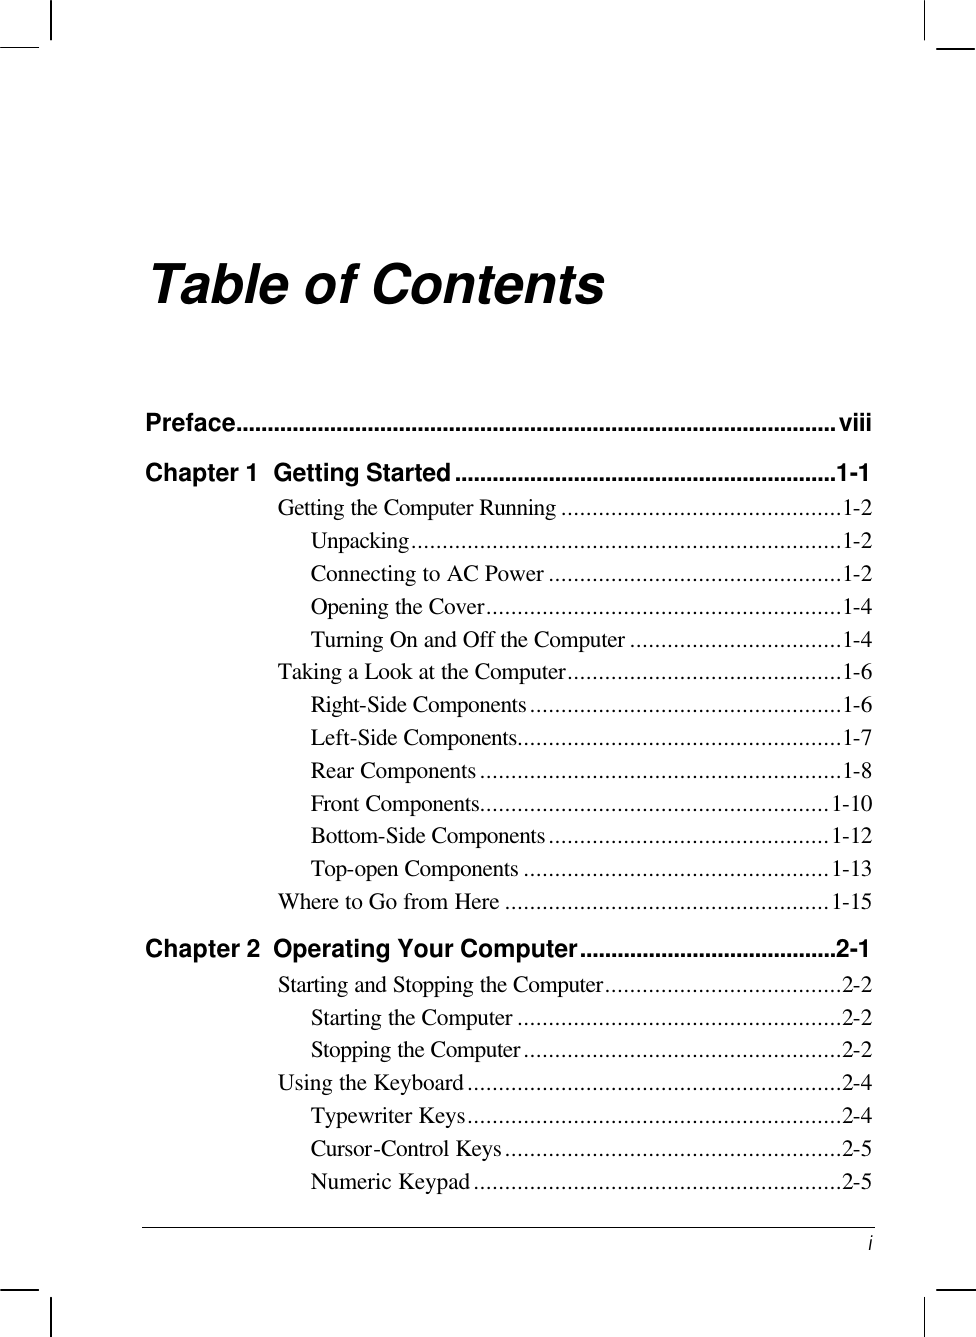   i Table of Contents Preface................................................................................................viii Chapter 1  Getting Started.............................................................1-1 Getting the Computer Running .............................................1-2 Unpacking.....................................................................1-2 Connecting to AC Power ...............................................1-2 Opening the Cover.........................................................1-4 Turning On and Off the Computer ..................................1-4 Taking a Look at the Computer............................................1-6 Right-Side Components..................................................1-6 Left-Side Components....................................................1-7 Rear Components..........................................................1-8 Front Components........................................................1-10 Bottom-Side Components.............................................1-12 Top-open Components .................................................1-13 Where to Go from Here ....................................................1-15 Chapter 2  Operating Your Computer.........................................2-1 Starting and Stopping the Computer......................................2-2 Starting the Computer ....................................................2-2 Stopping the Computer...................................................2-2 Using the Keyboard............................................................2-4 Typewriter Keys............................................................2-4 Cursor-Control Keys......................................................2-5 Numeric Keypad...........................................................2-5 